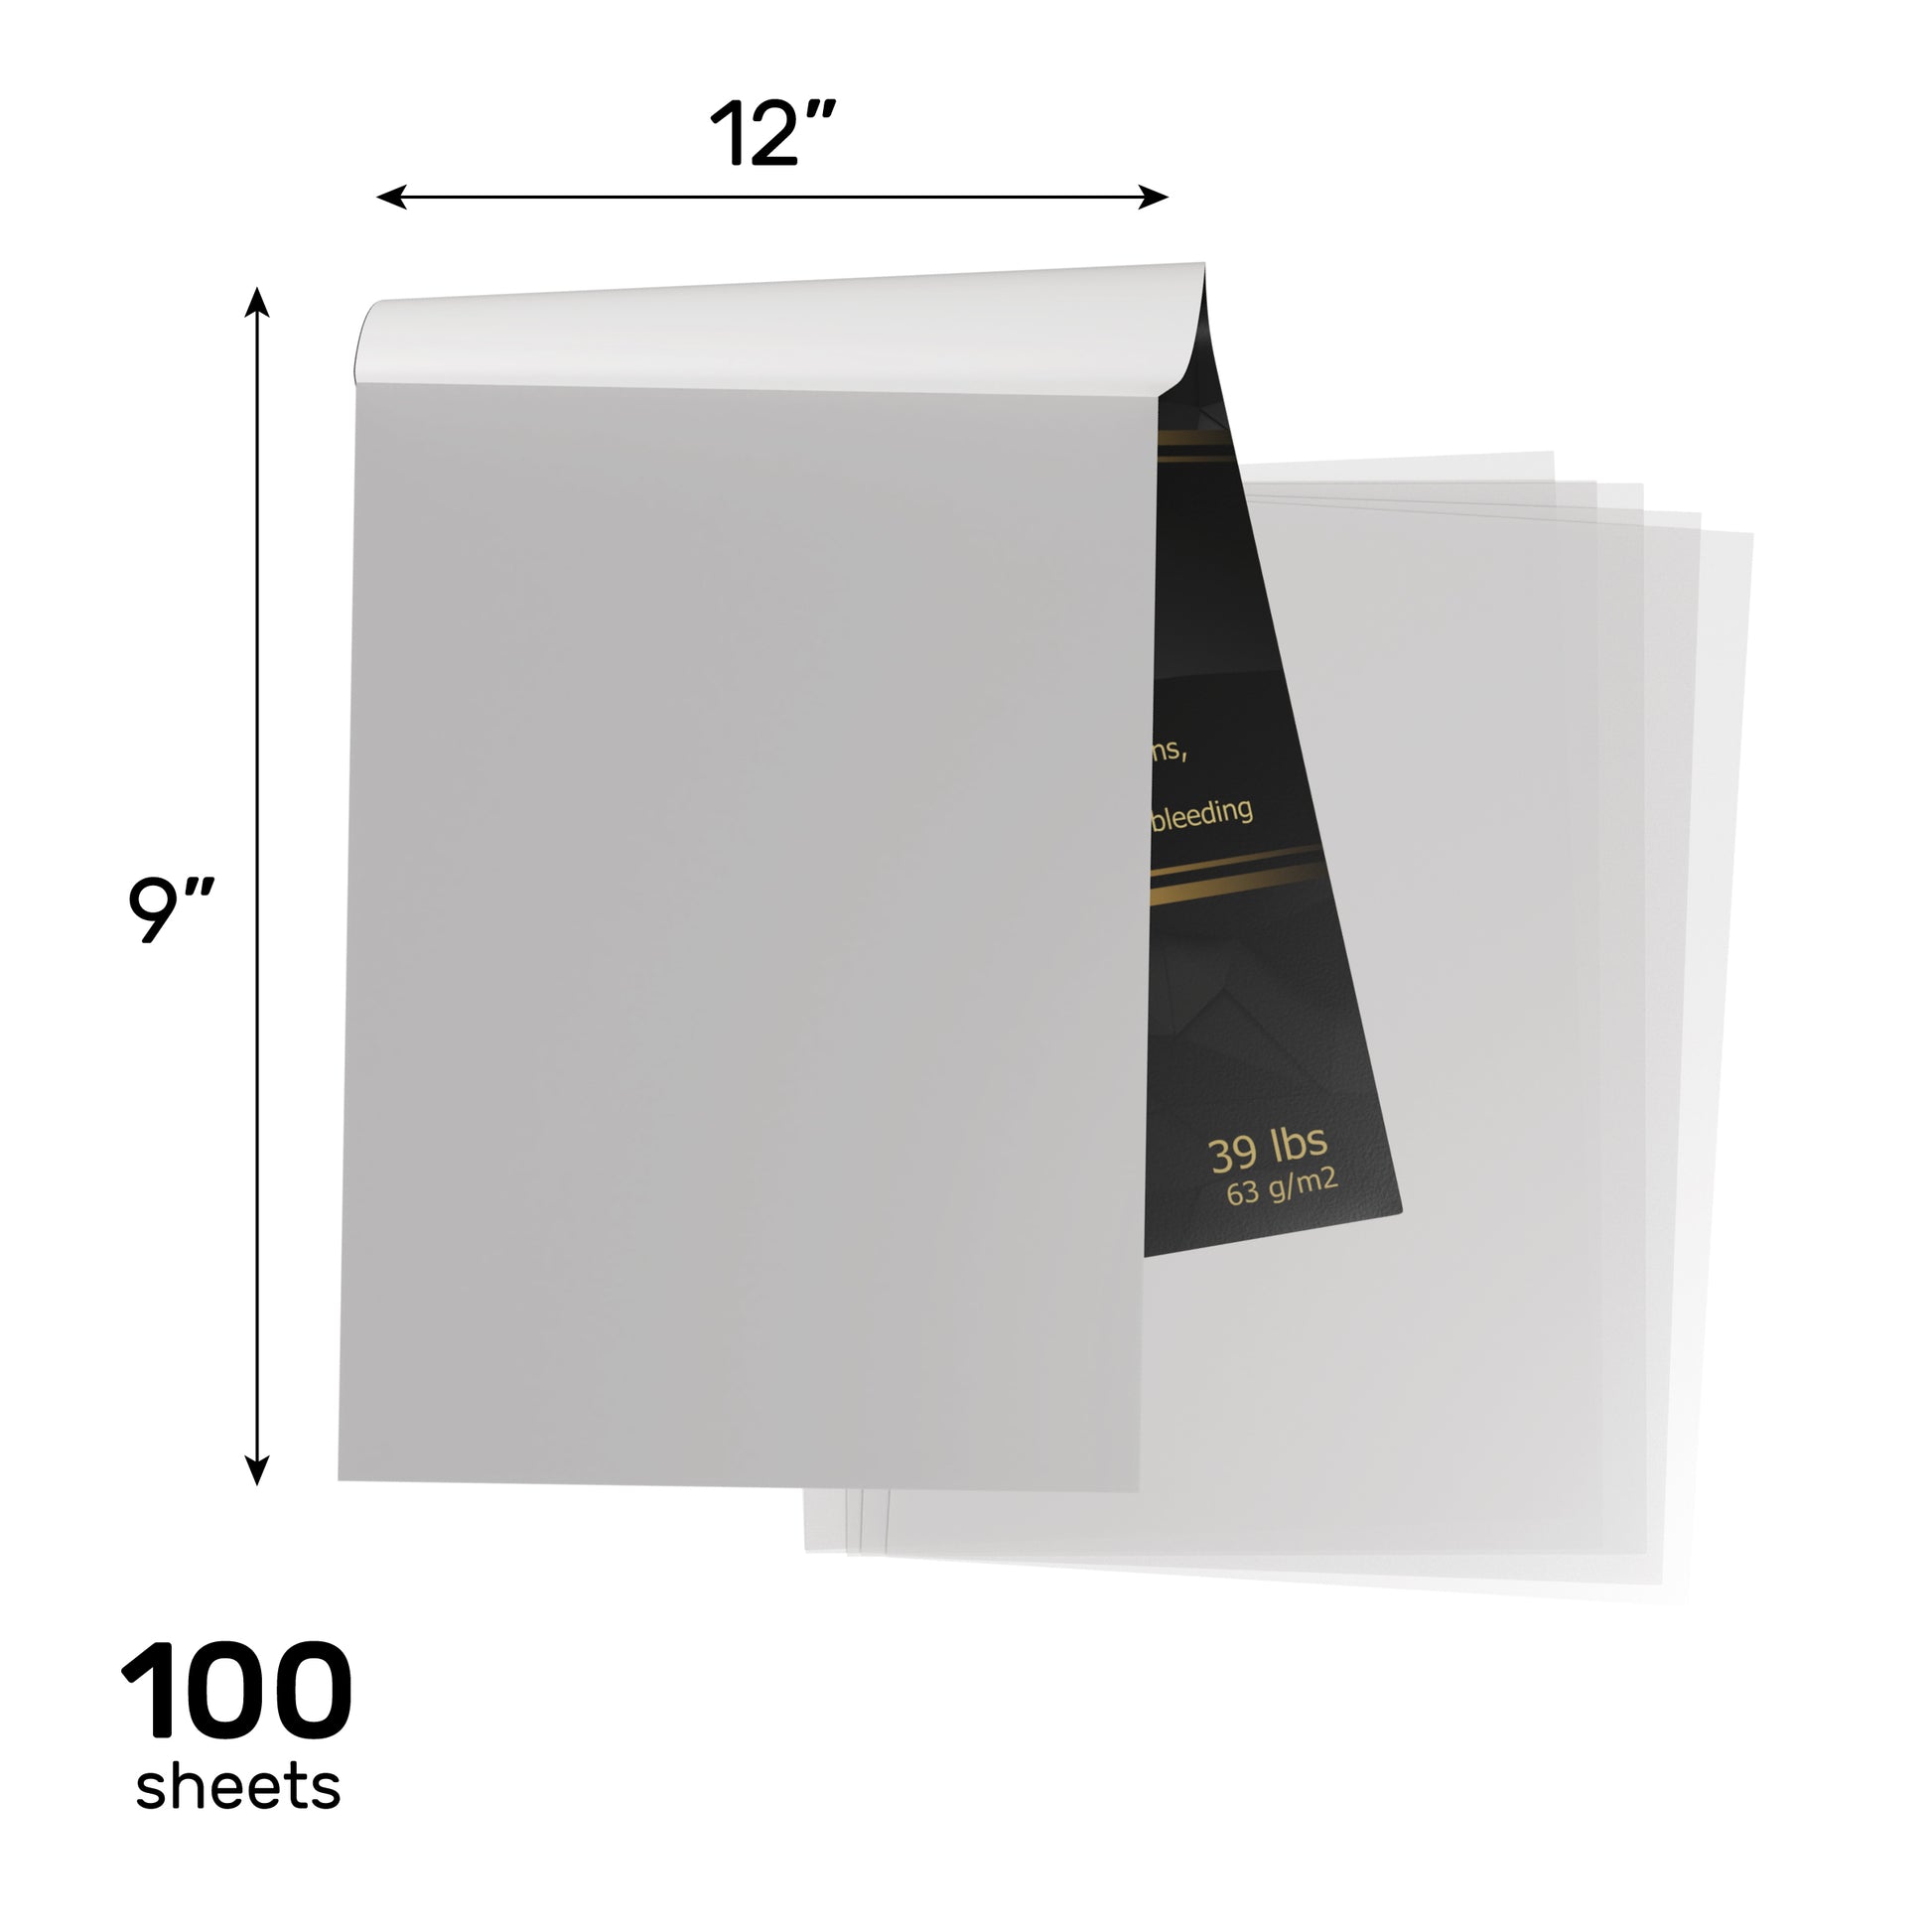 30% OFF Tracing Paper Pad - 9 x 12